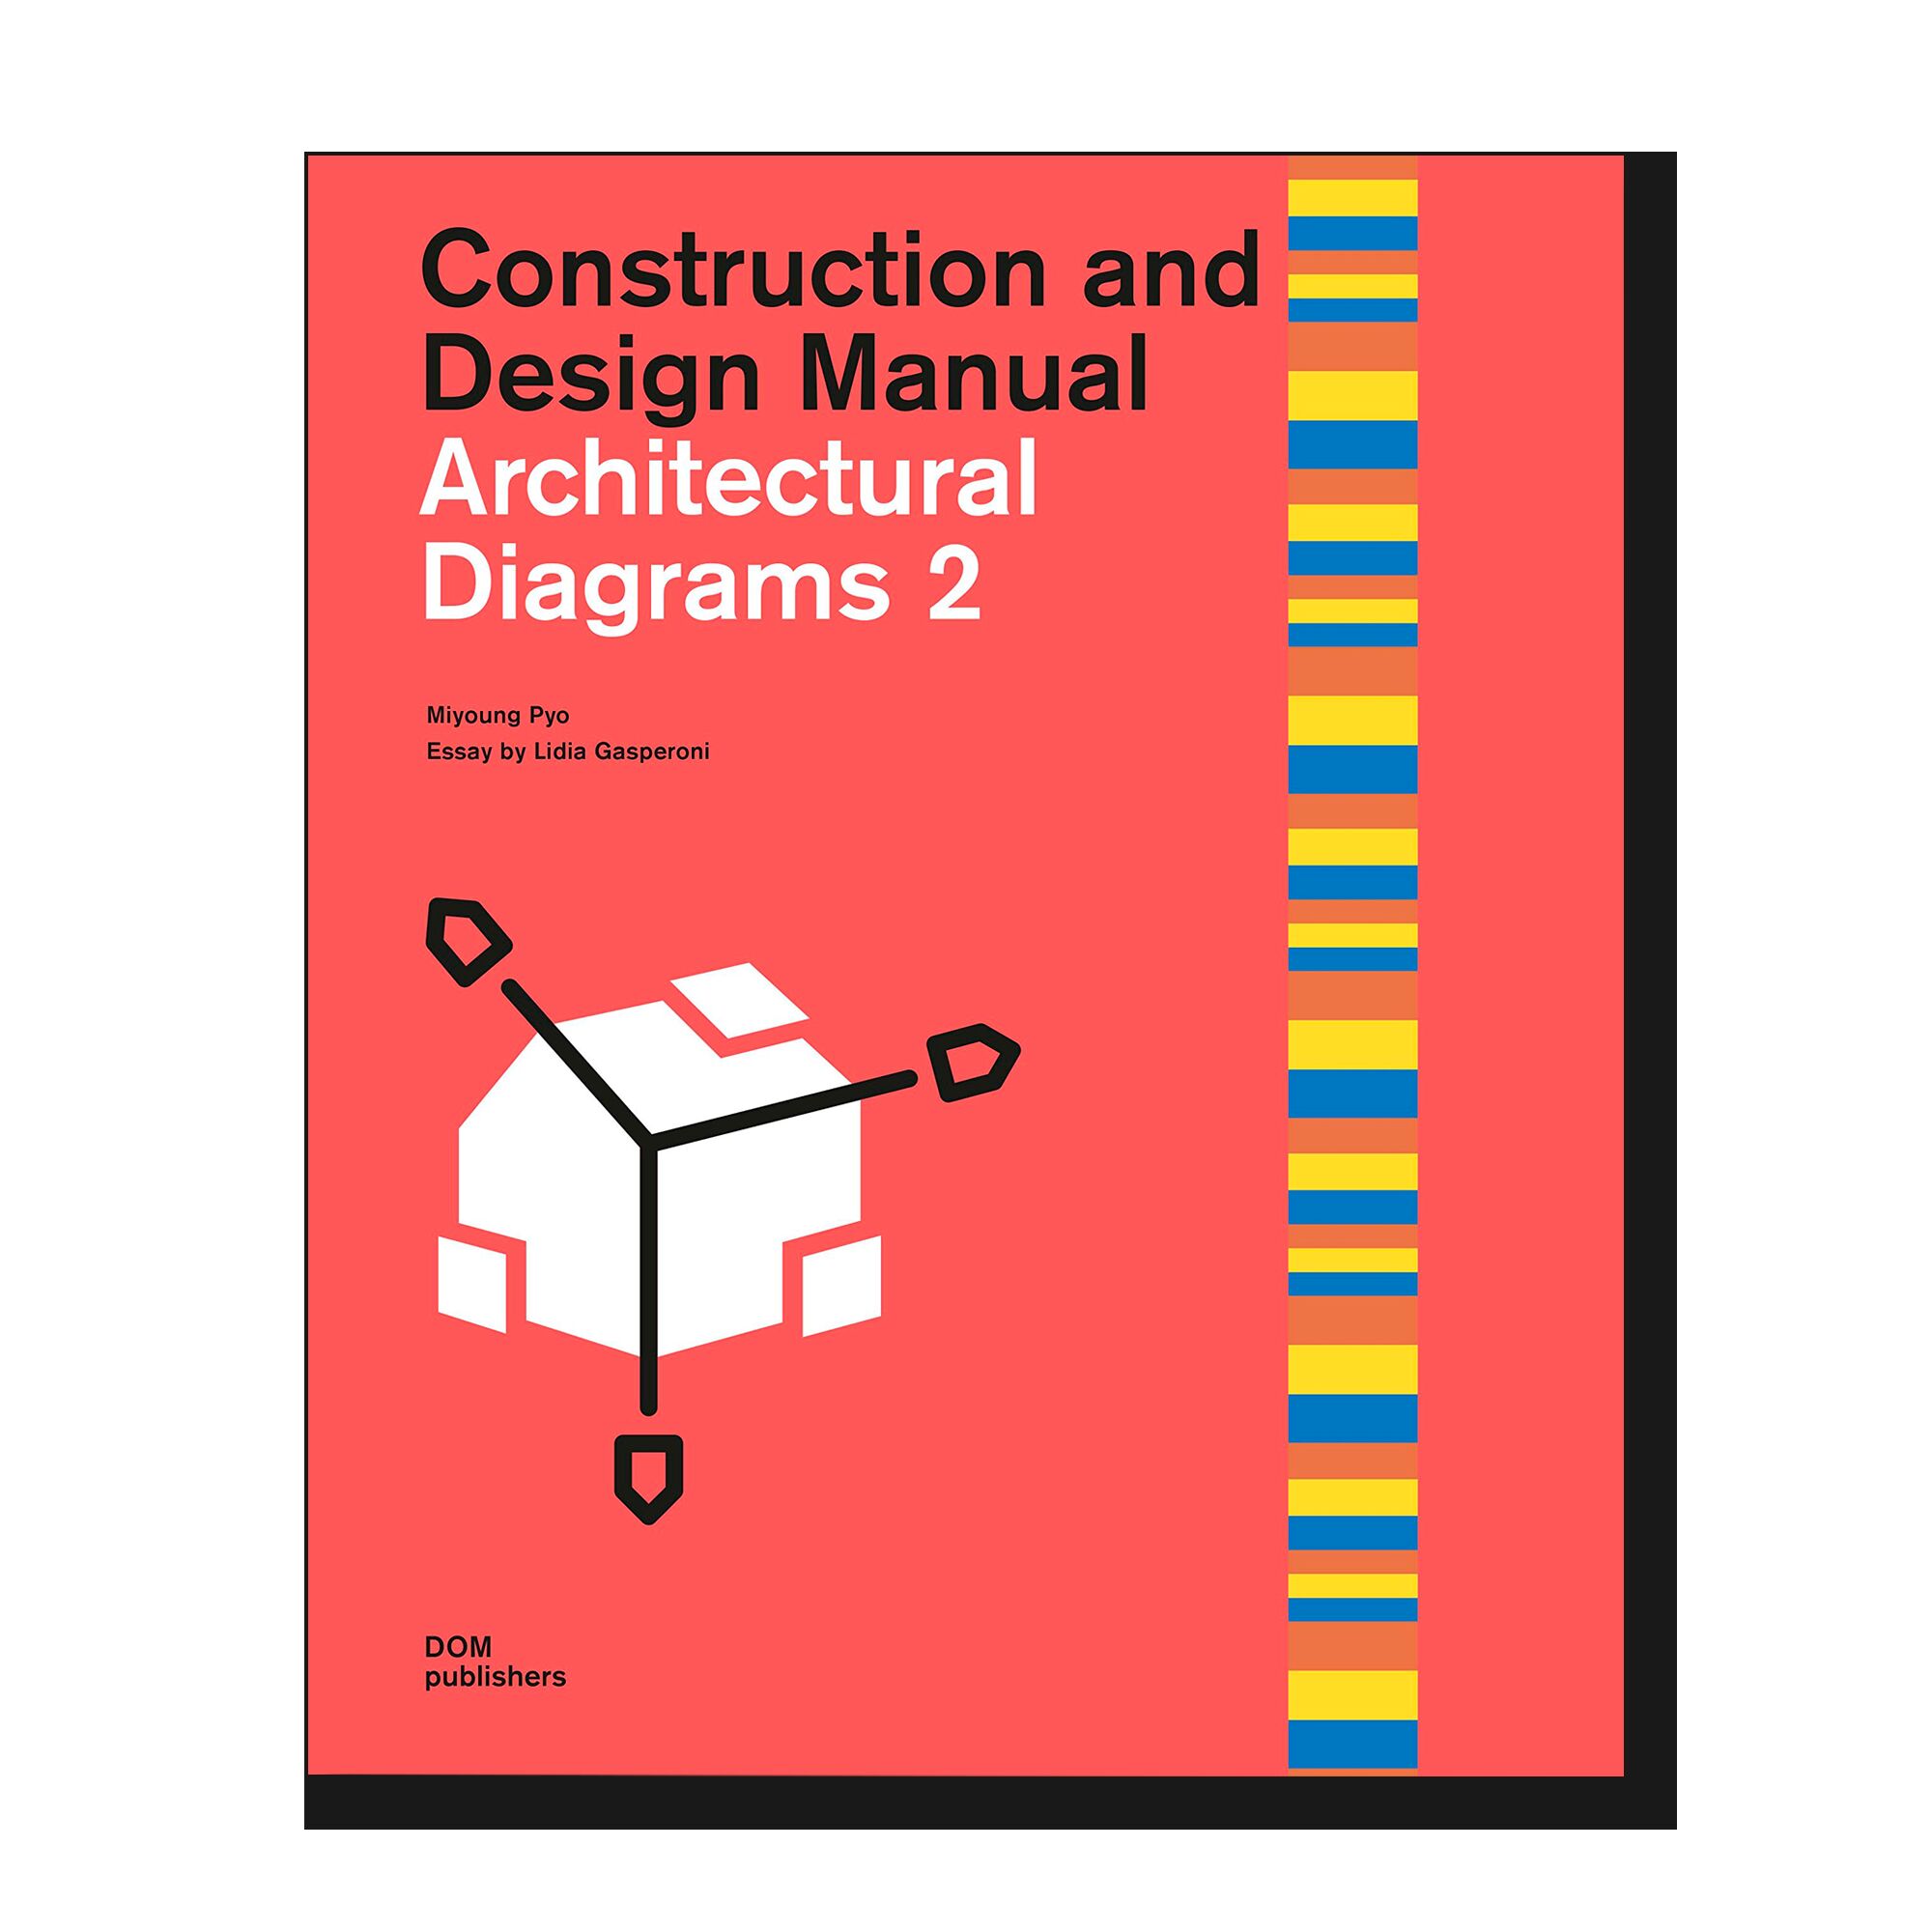 Architectural Diagrams 2: Construction and Design Manual